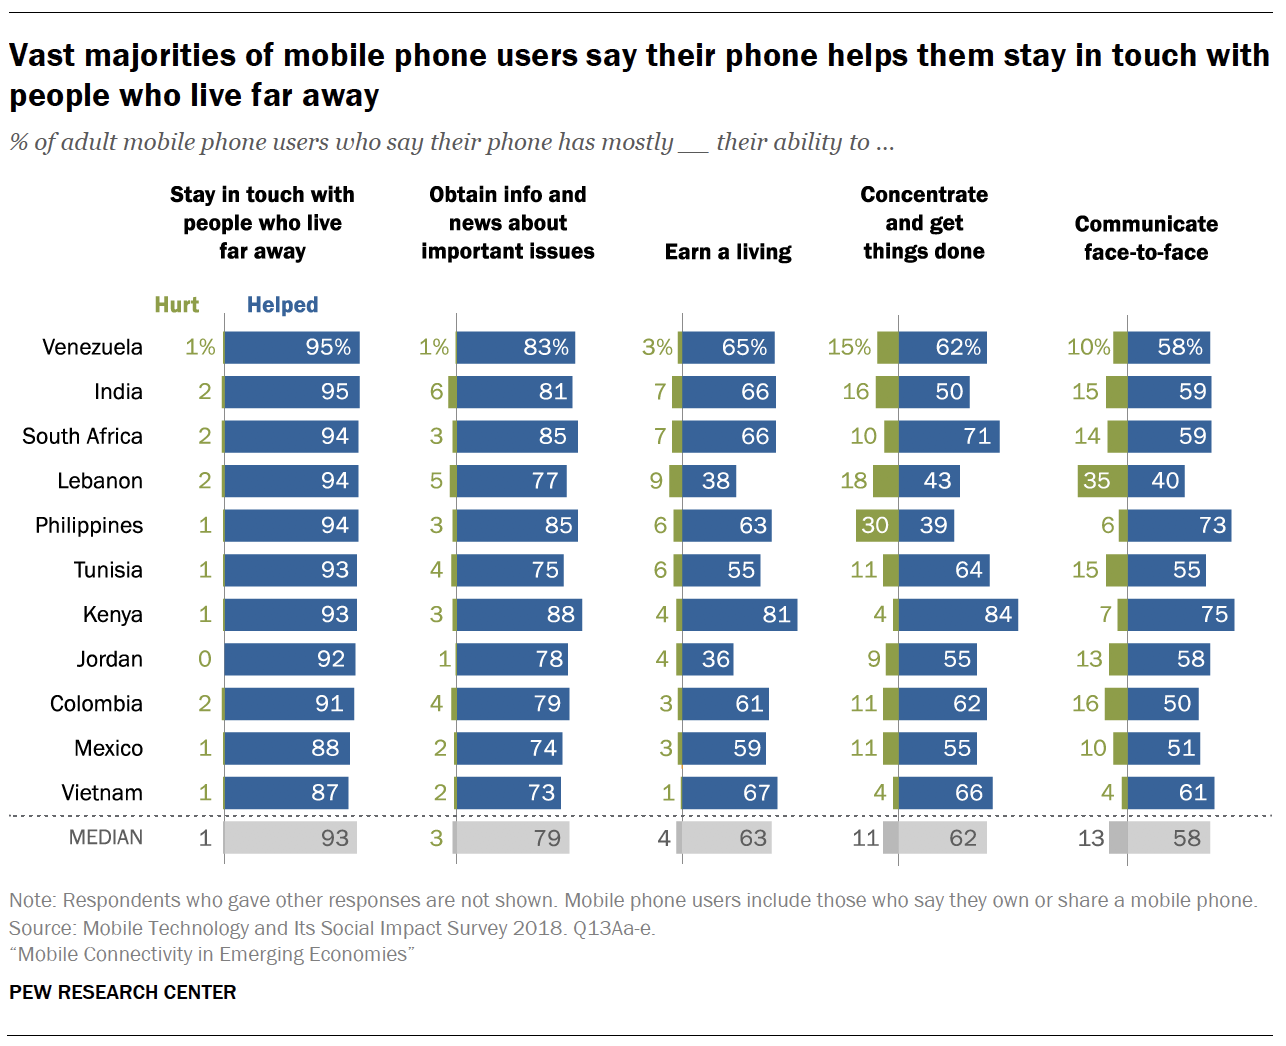 Vast majorities of mobile phone users say their phone helps them stay in touch with people who live far away